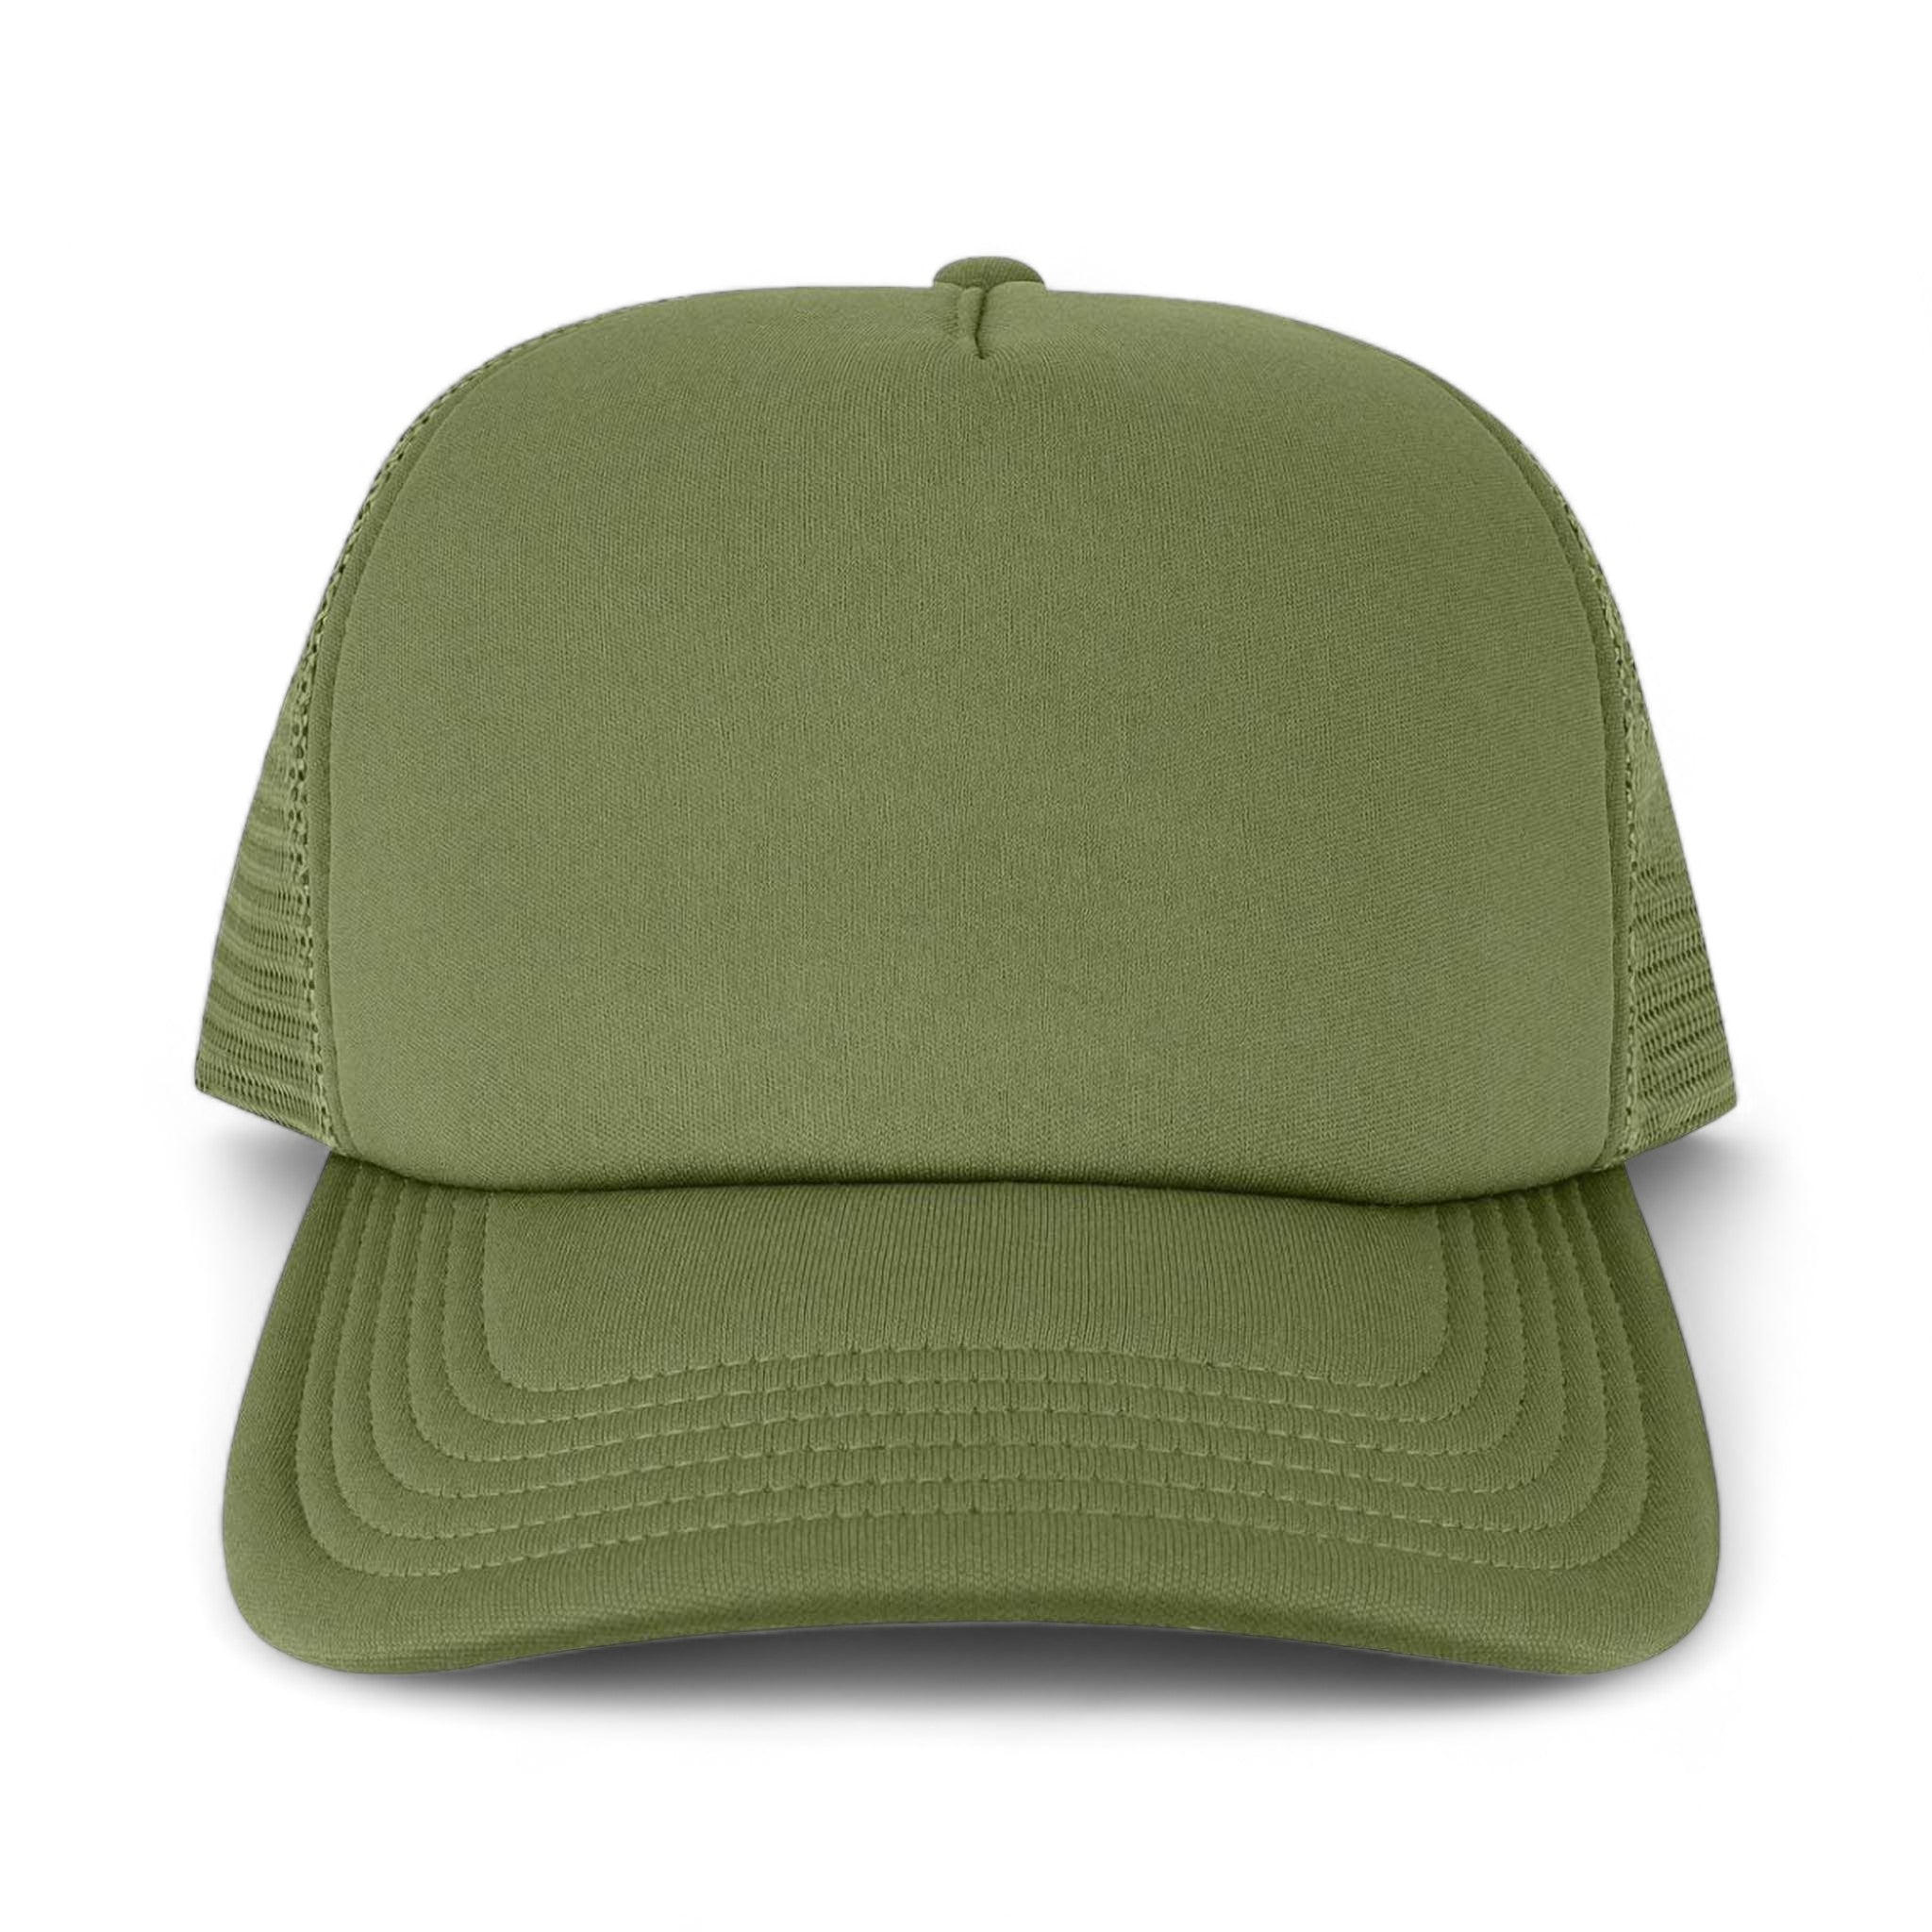 Front view of LEGACY LTA custom hat in light olive green